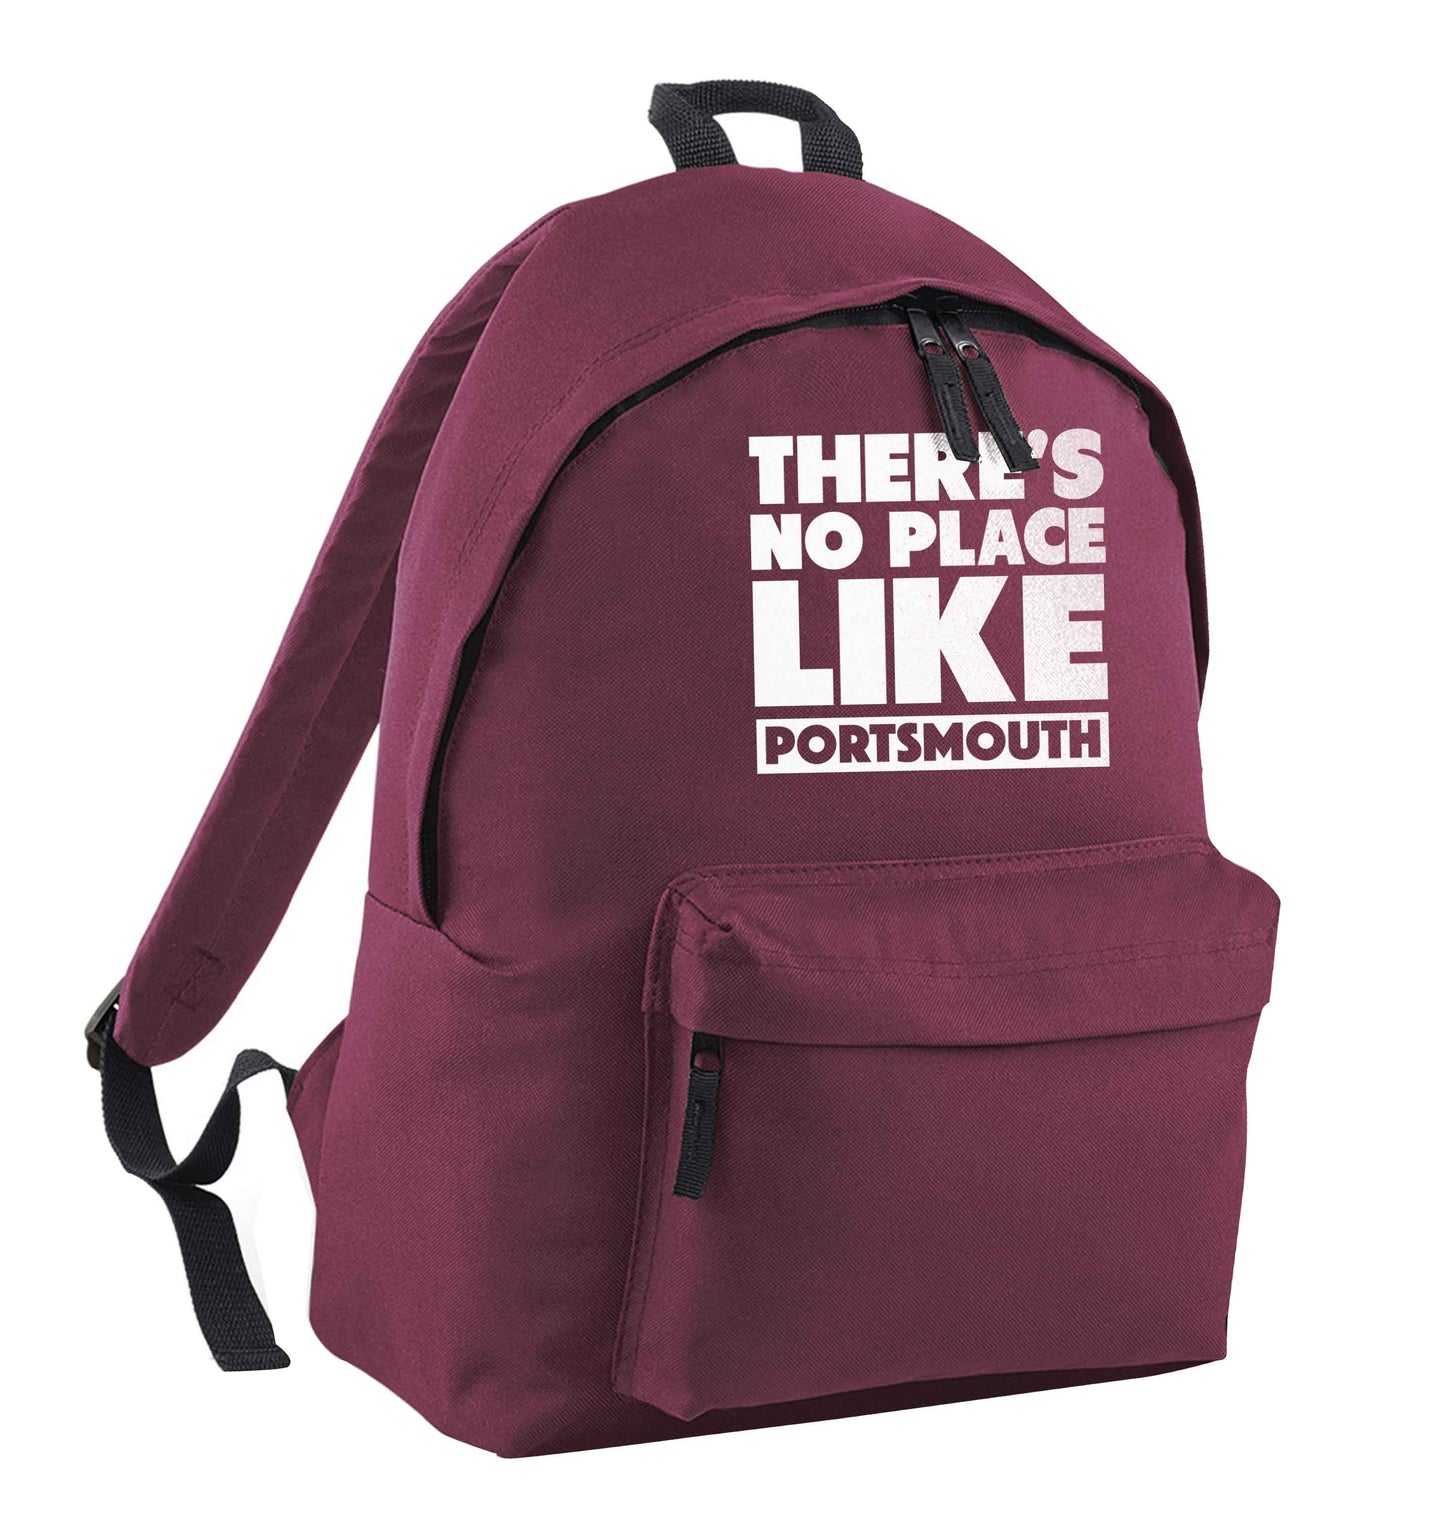 There's no place like Porstmouth maroon adults backpack